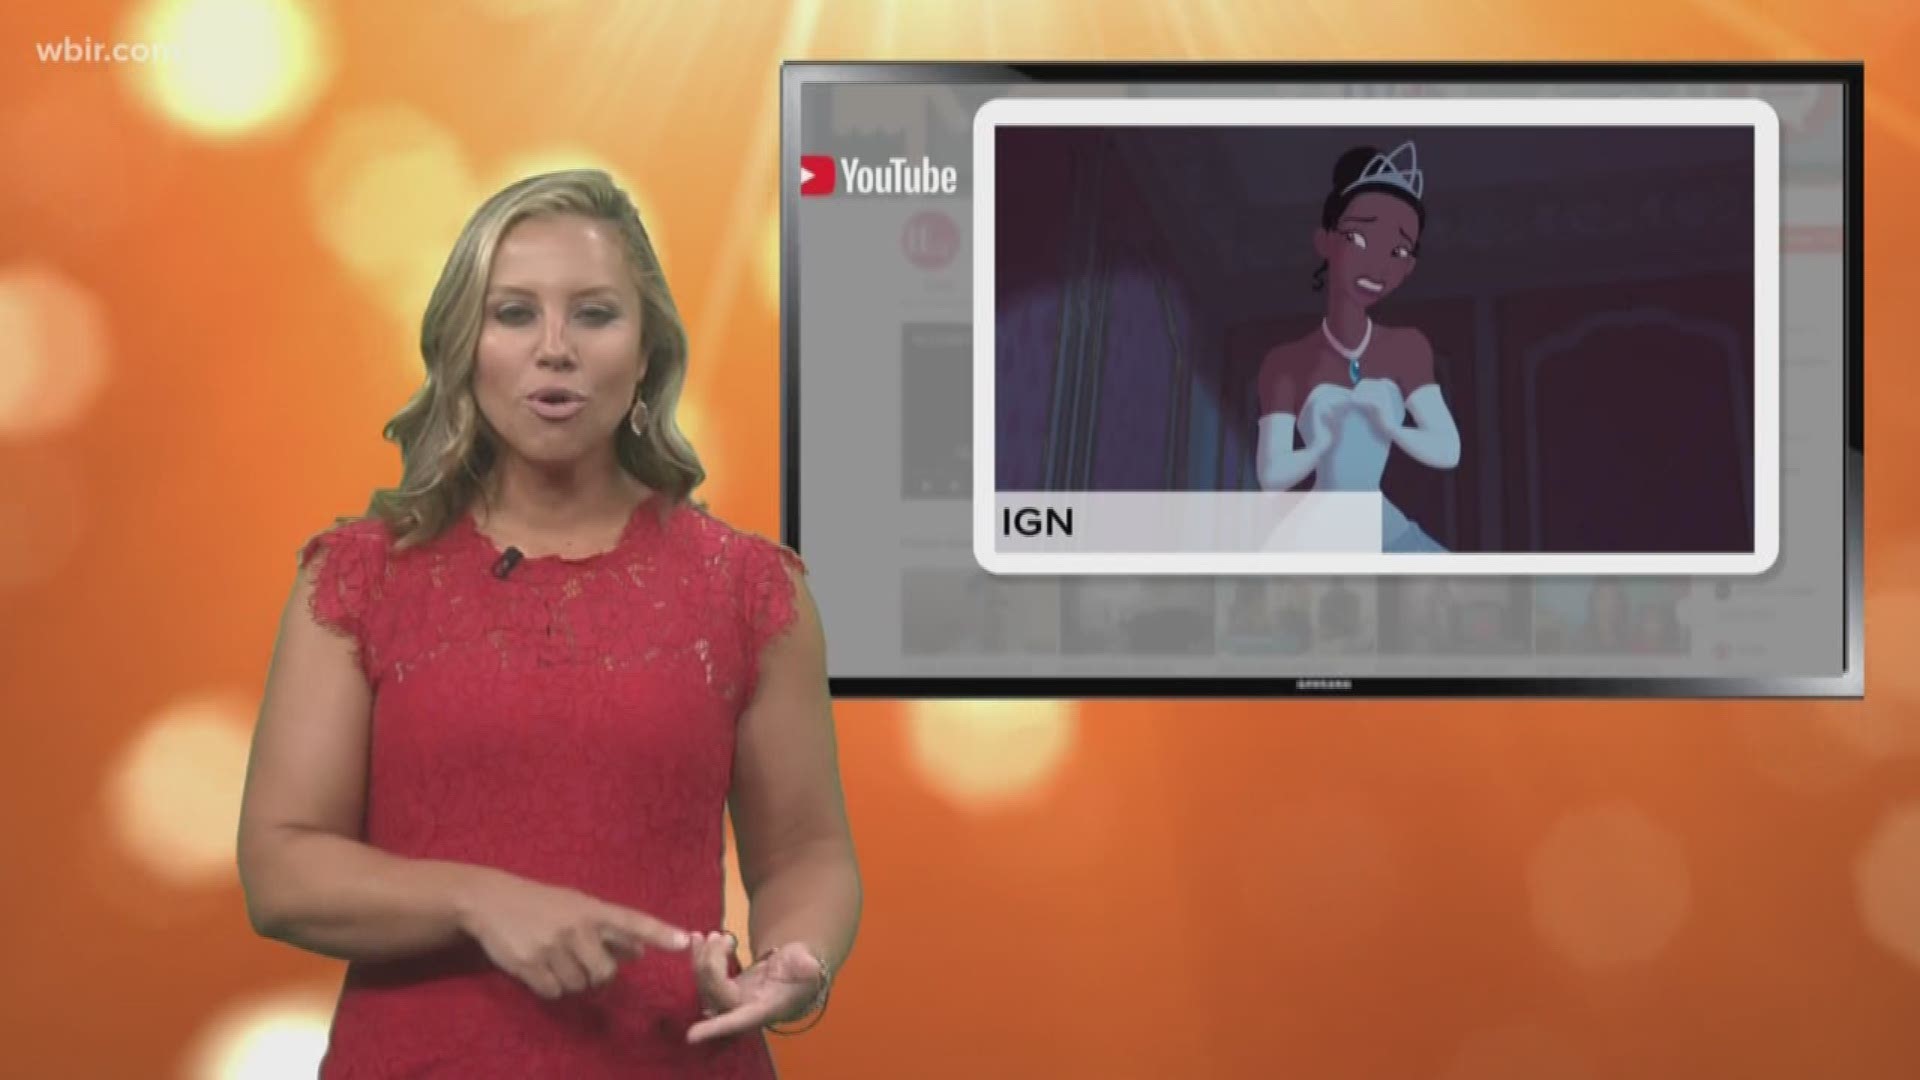 10News Anchor Abby Ham takes a look at today's top trending stories.